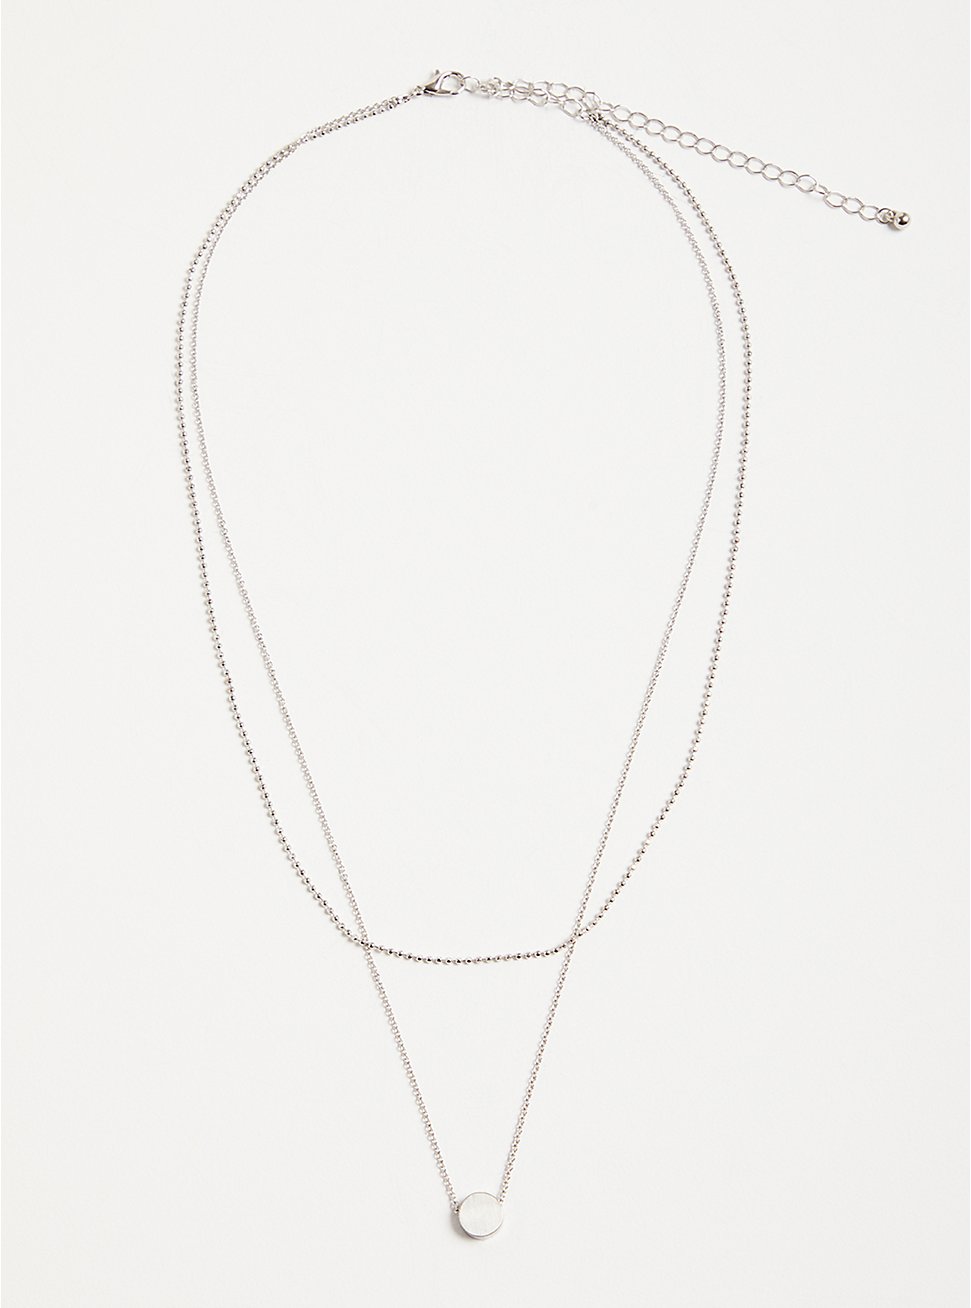 Dot & Disc Layered Necklace - Silver Tone, , hi-res